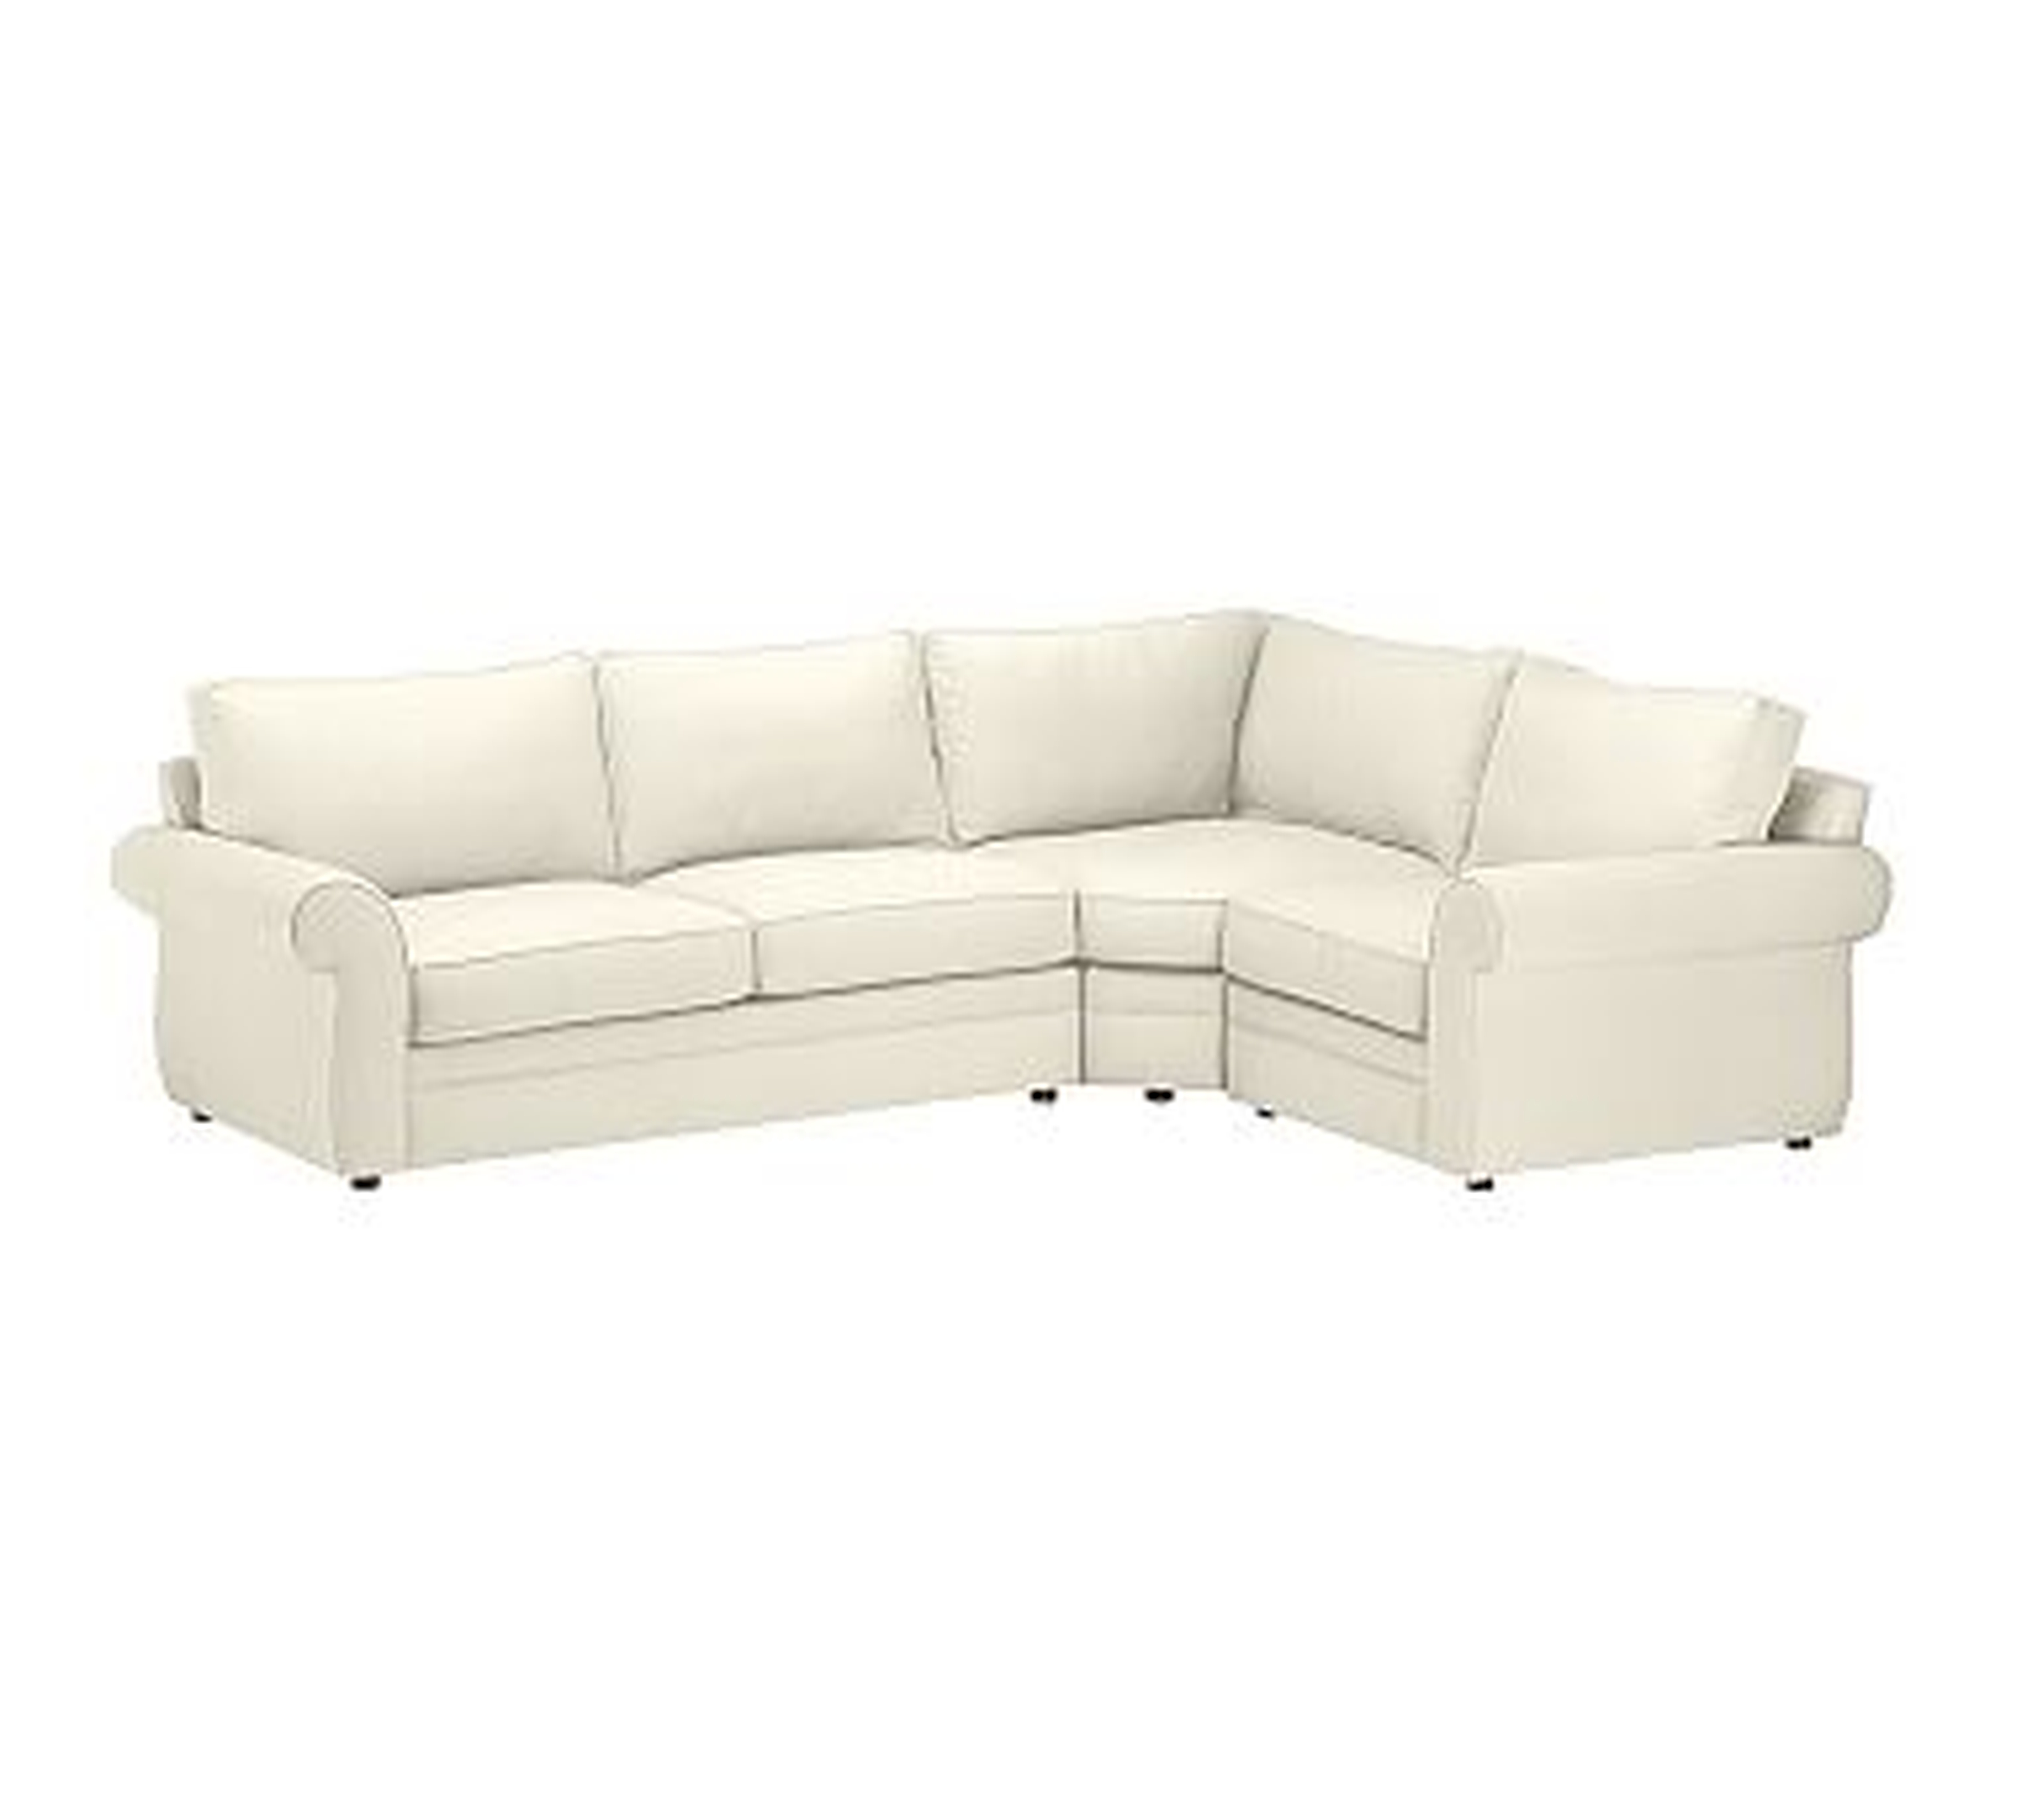 Pearce Roll Arm Upholstered Left Arm 3-Piece Wedge Sectional, Down Blend Wrapped Cushions, Premium Performance Basketweave Ivory - Pottery Barn